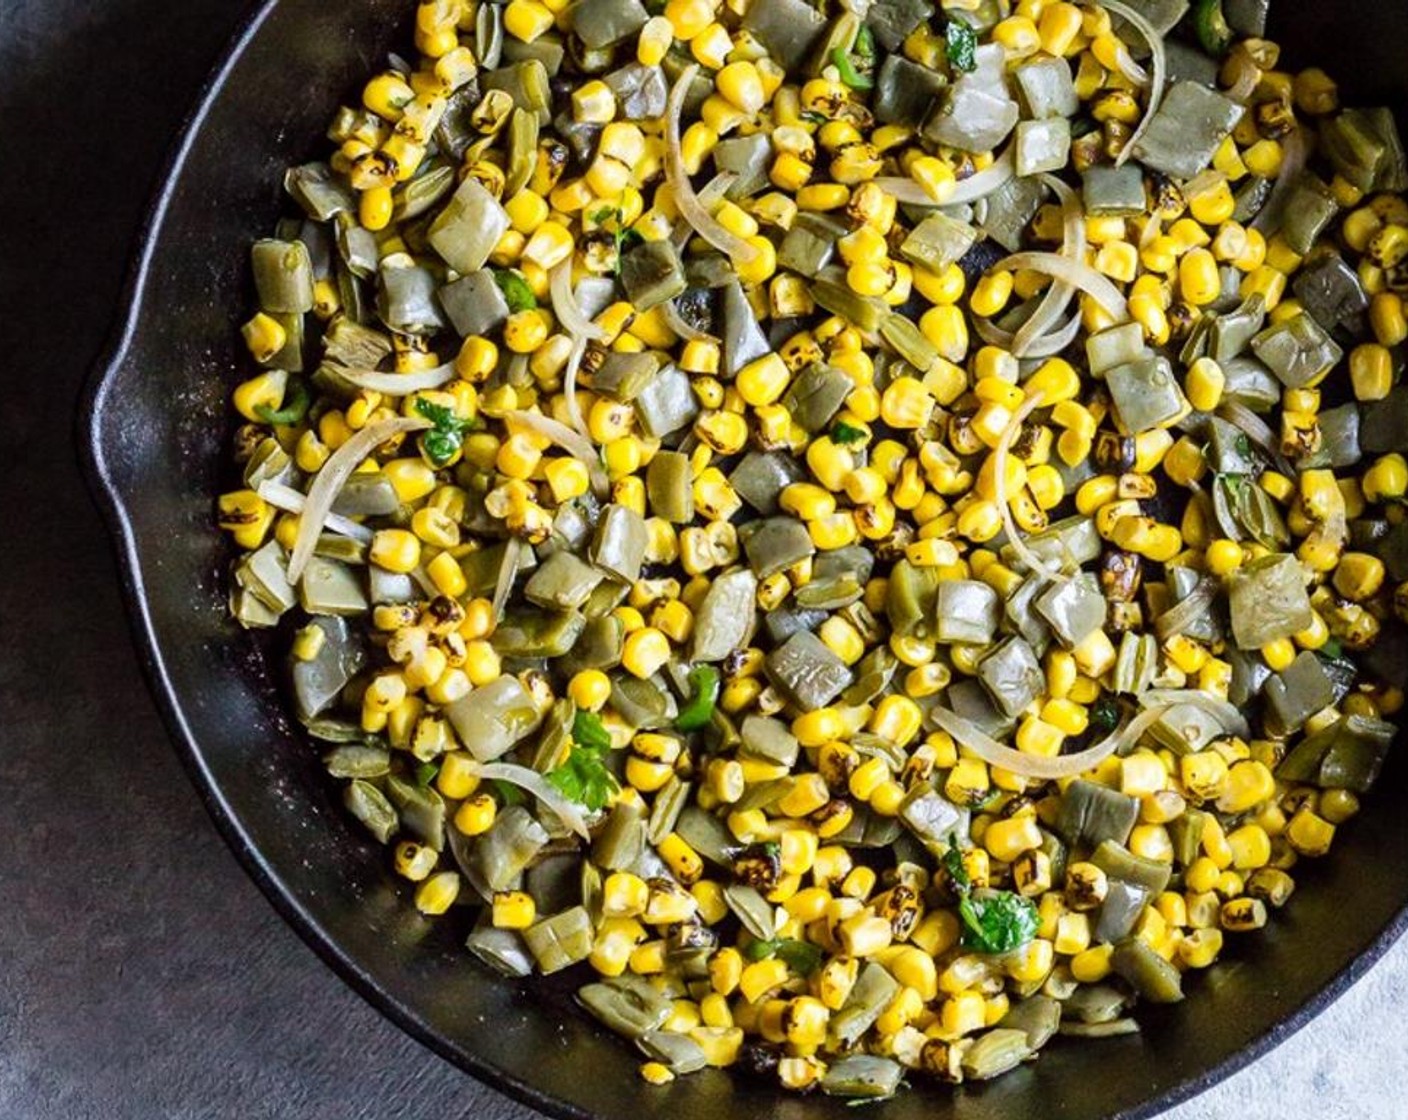 step 8 Add Fire Roasted Corn Kernels (1 1/2 cups) (thawed to room temp if using frozen corn) to the skillet and cook with the nopales for a few minutes until heated through - turn off heat and leave skillet on the stovetop to stay warm while you prepare the tacos.